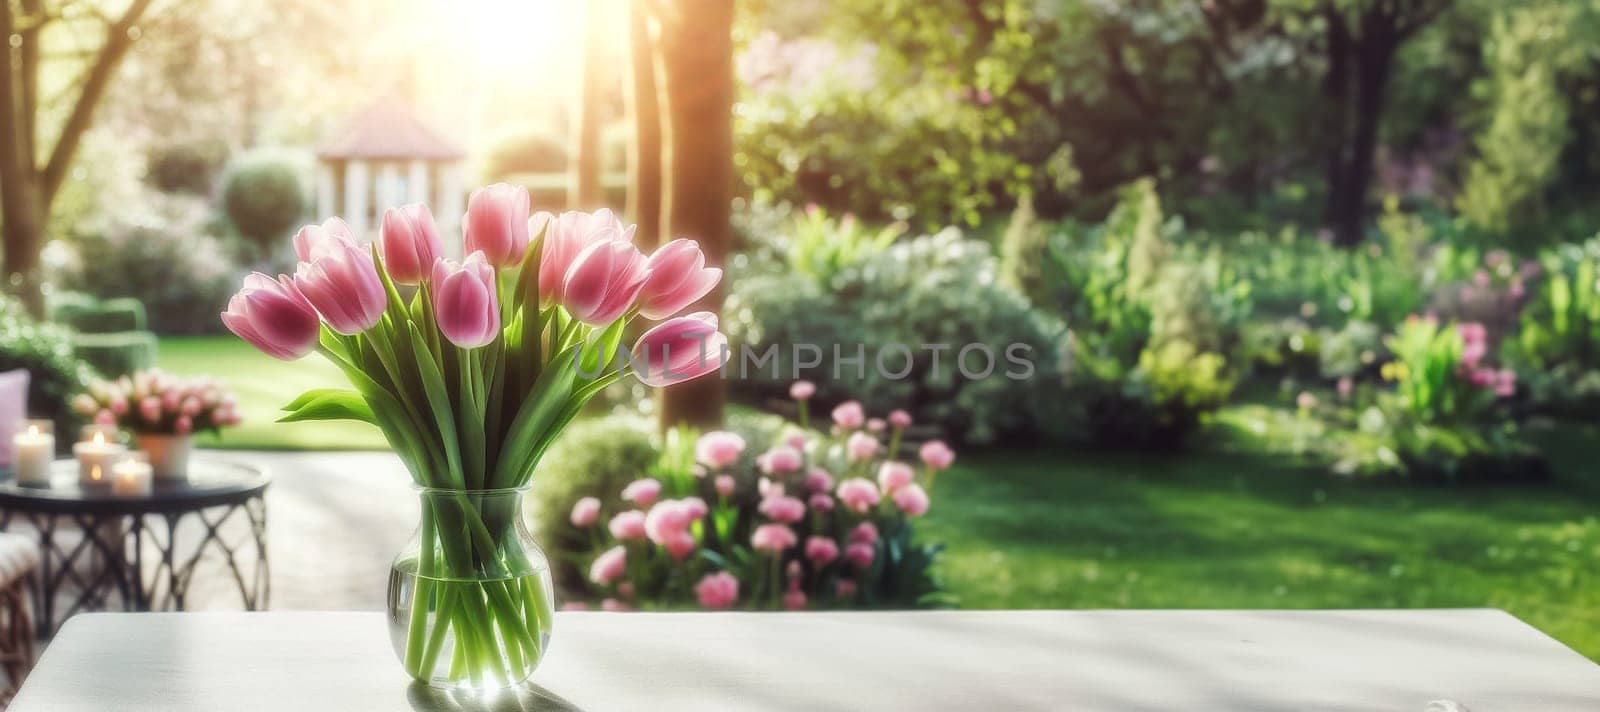 Bouquet pink tulips in glass vase on table in garden on sunny spring day by EkaterinaPereslavtseva